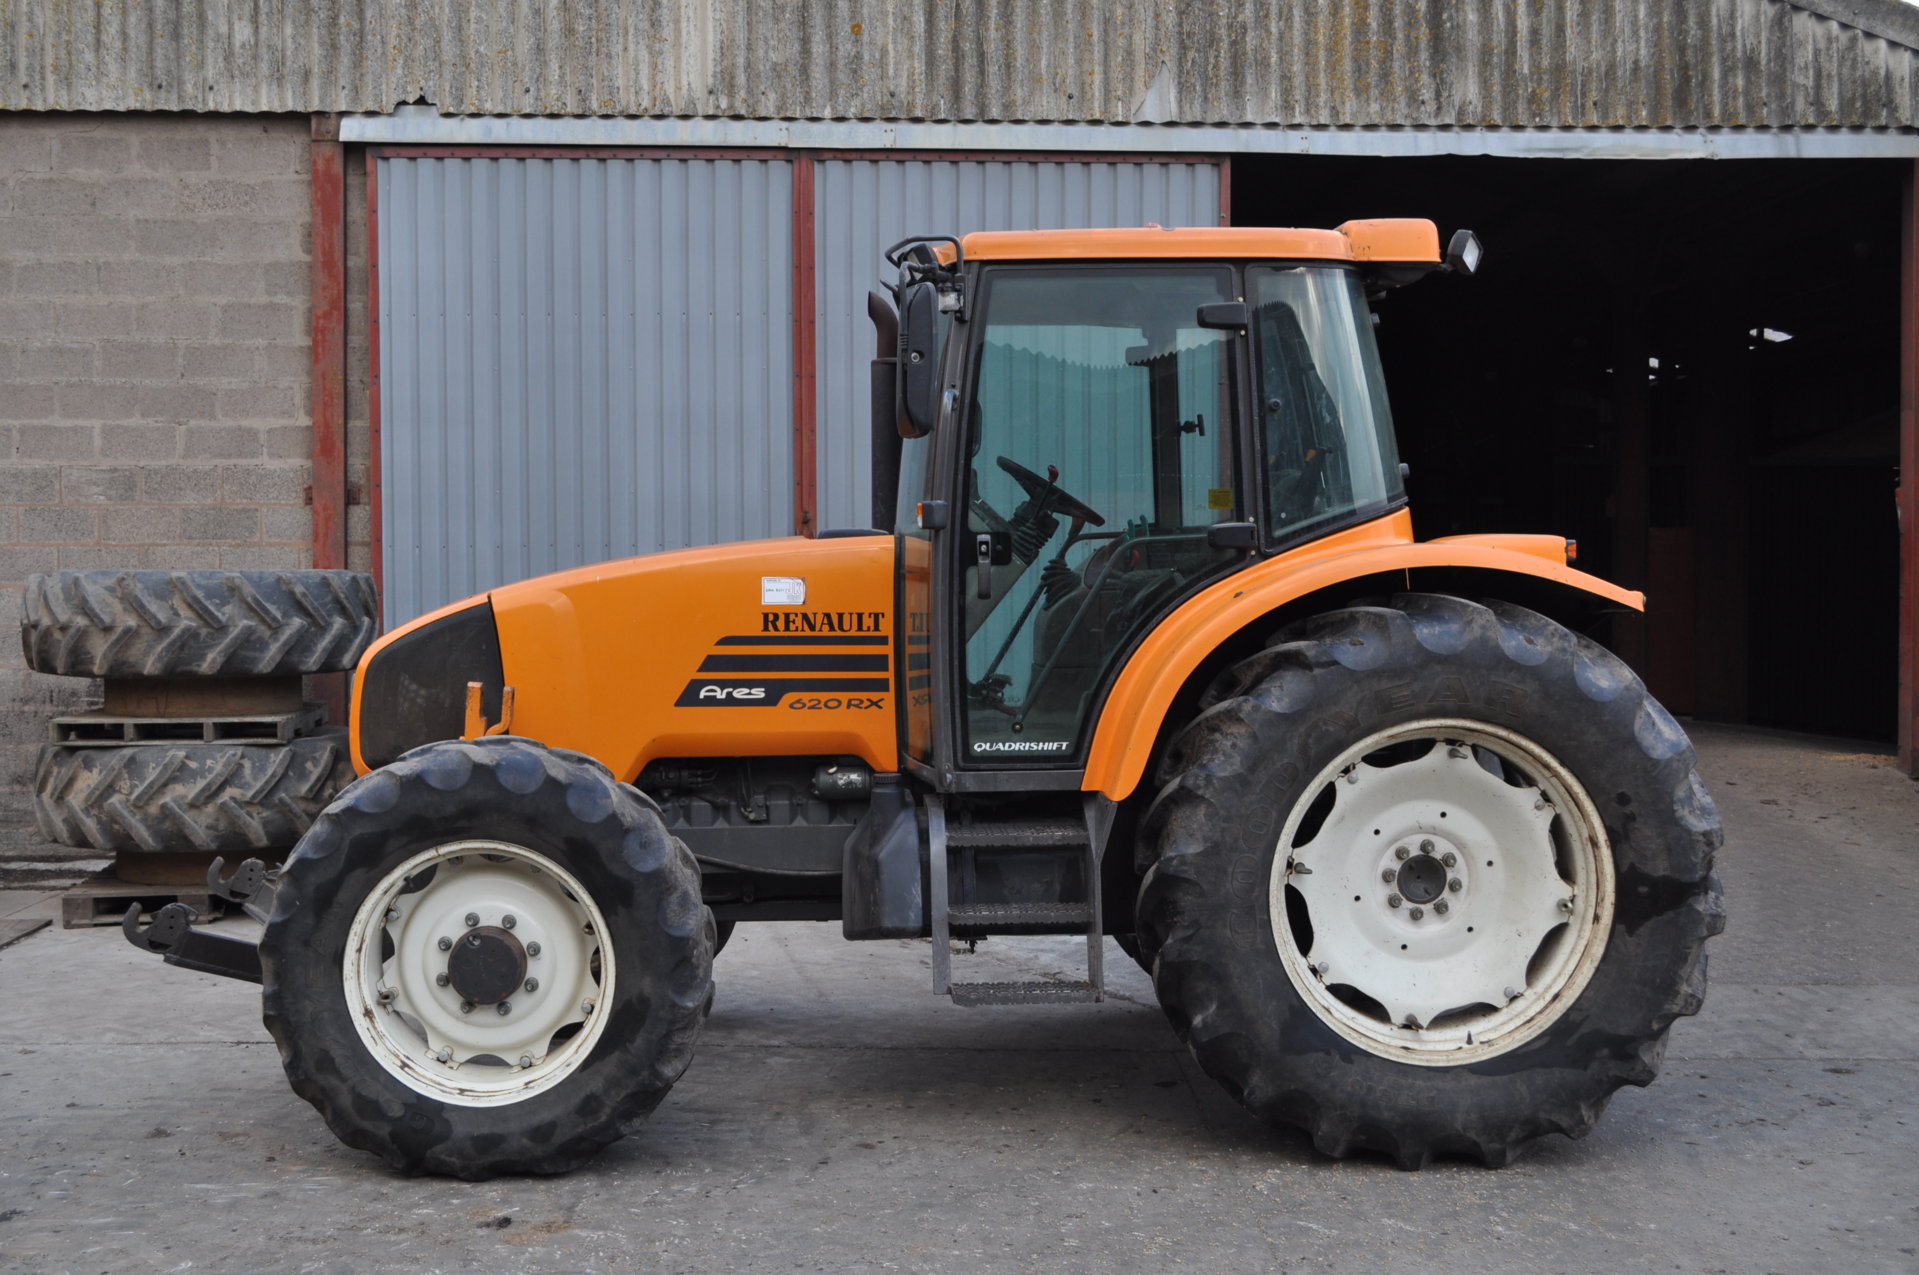 Renault Ares 620, 4900 hours. The Farming Forum